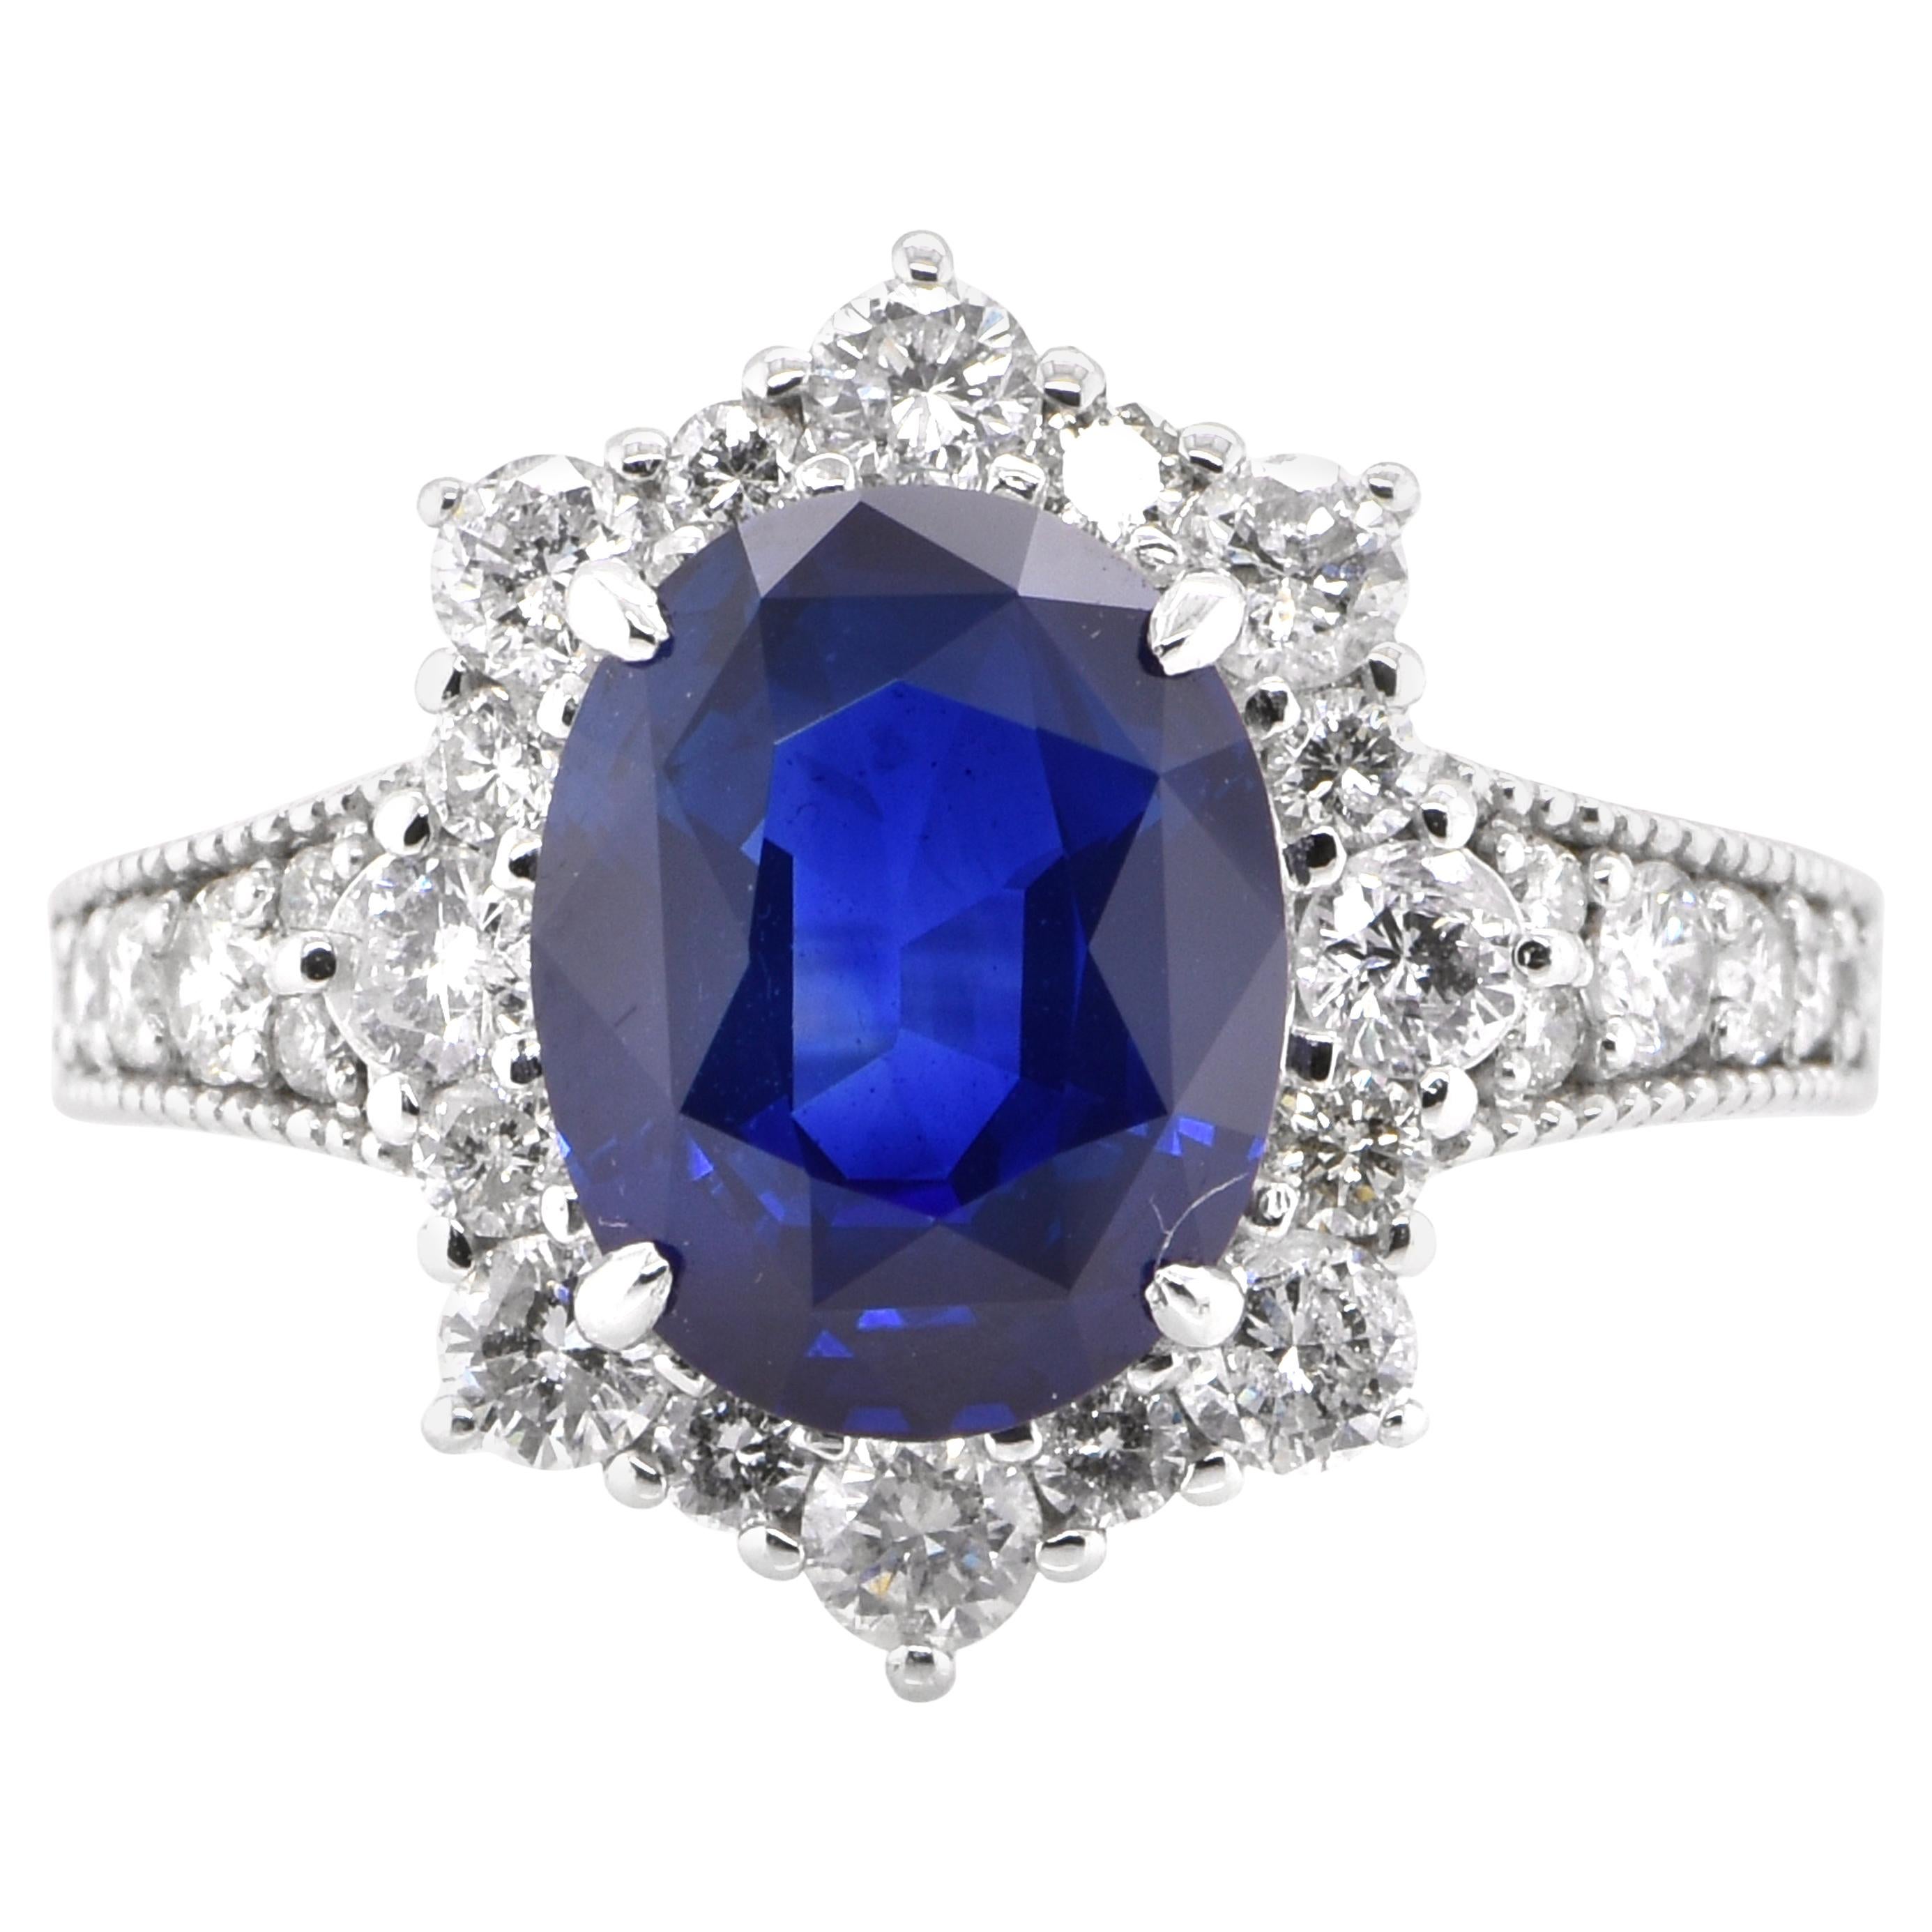 GIA Certified 3.50 Carat Natural Blue Sapphire and Diamond Ring Set in Platinum